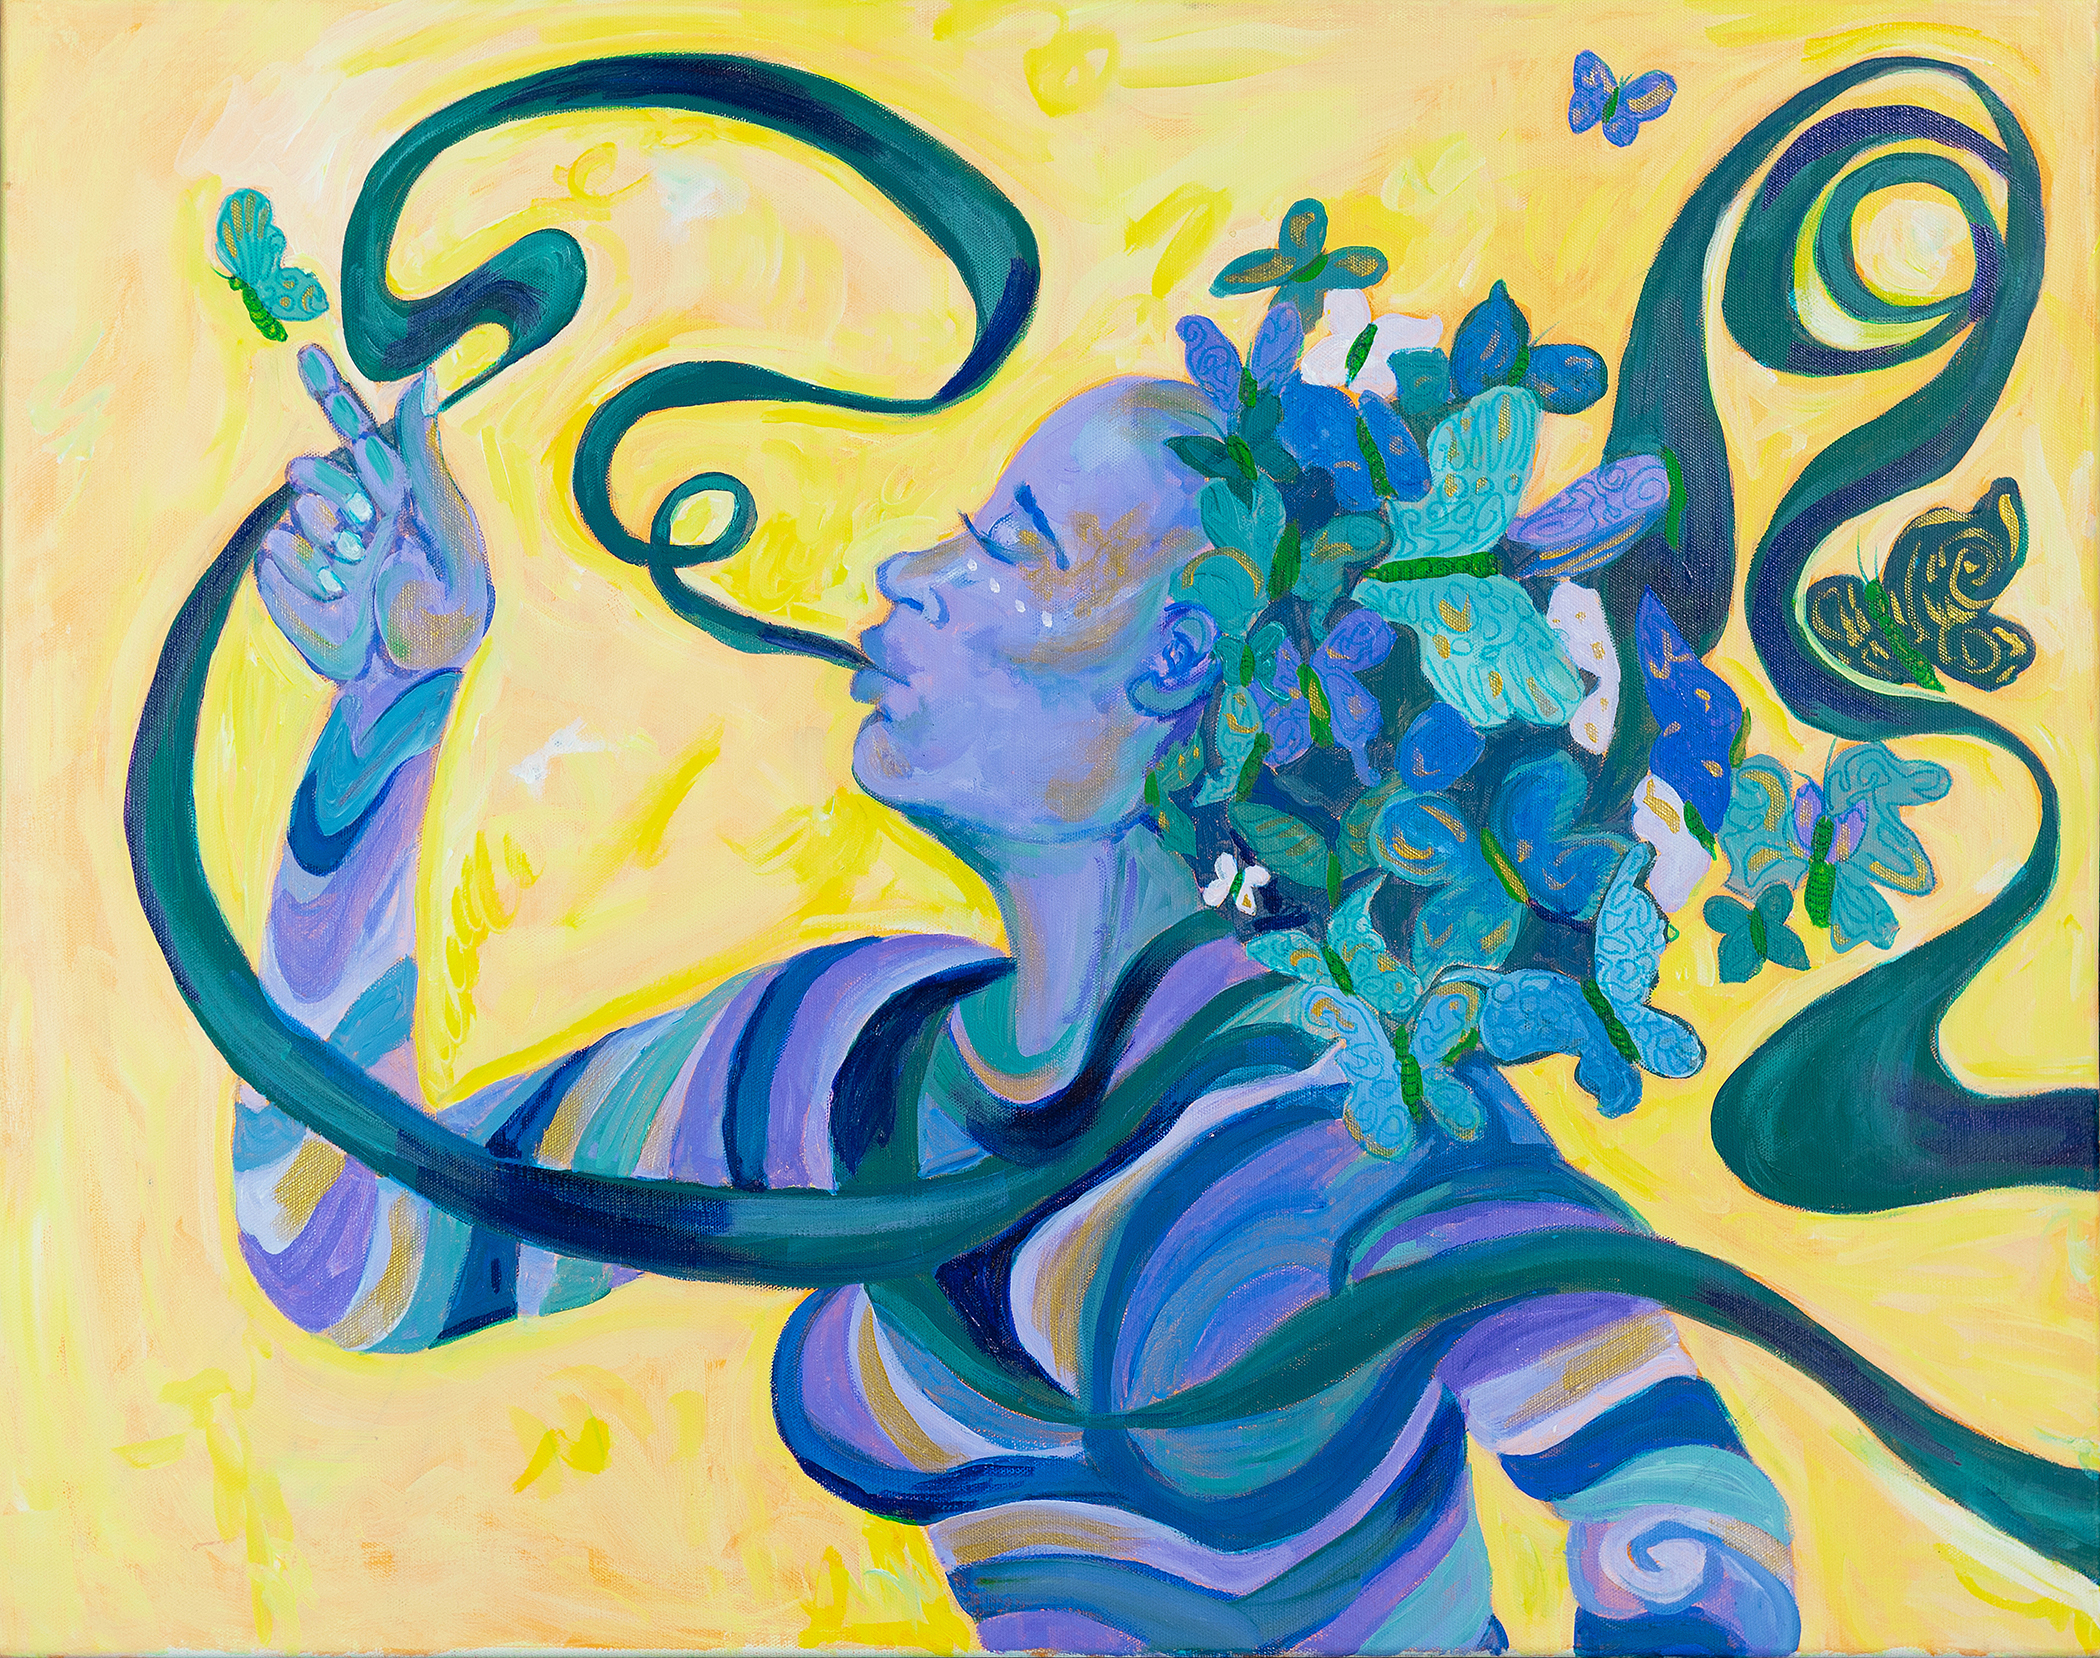 In the painting, the background is a bright yeloow while the rest of the work is in blue, green and purple hues. A femme figure with butterflies and flowers for hair is blowing out smoke that flows in a long, swirly trail around the figure.